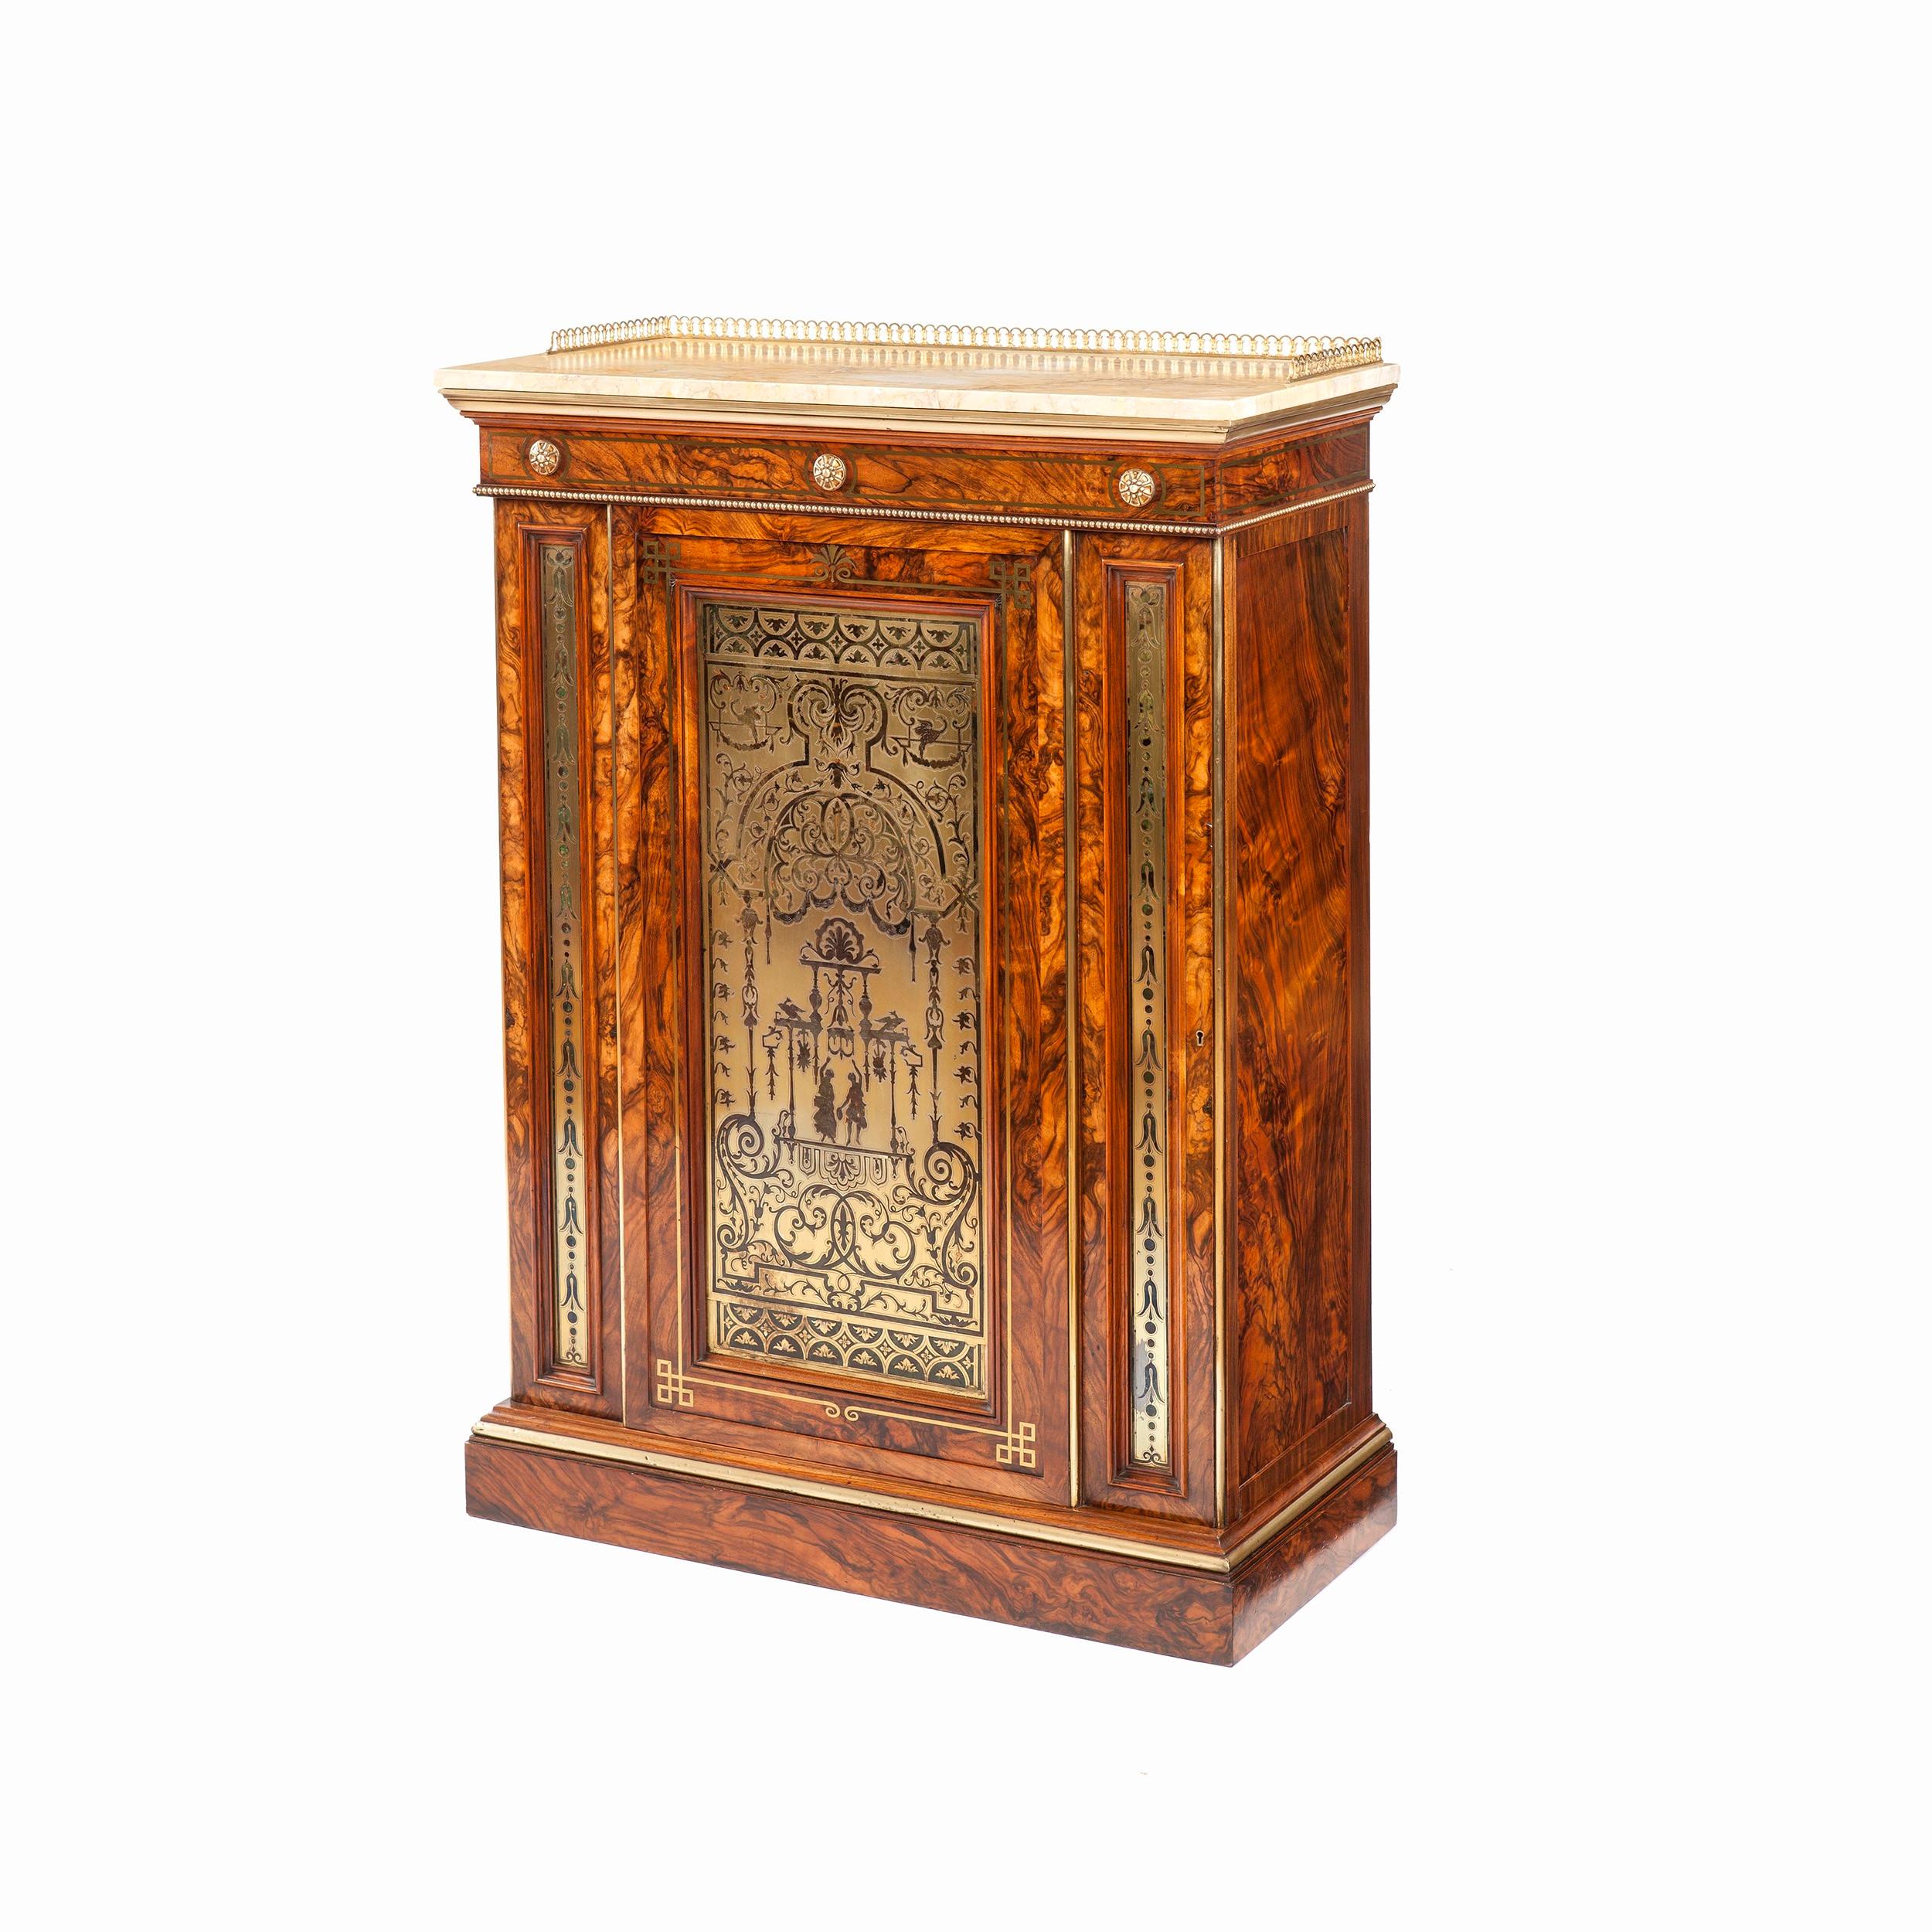 Regency 19th Century English Olivewood and Brass Inlaid Cabinet  For Sale